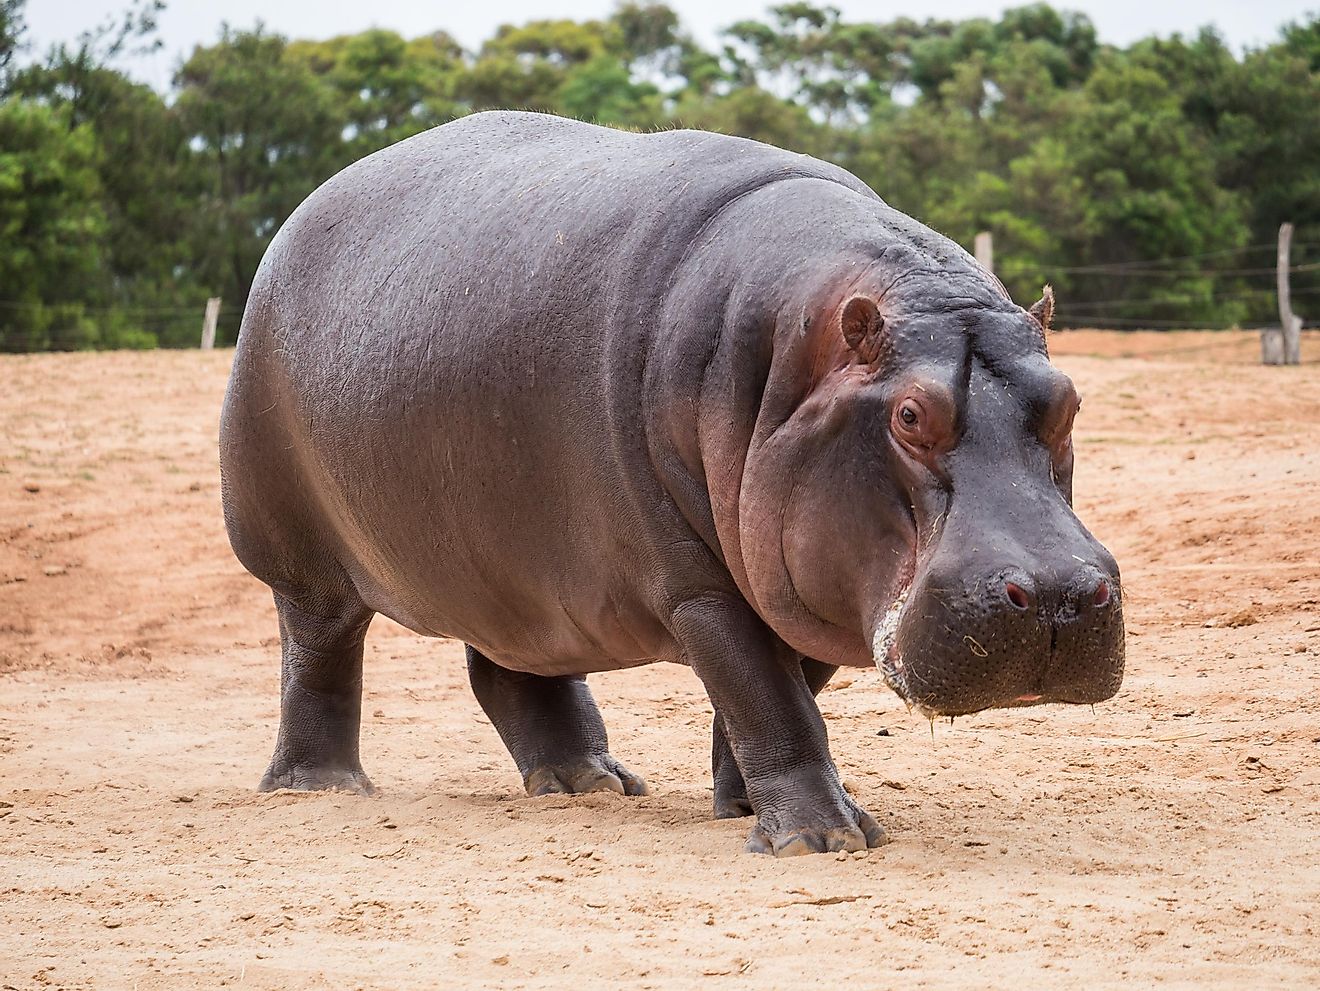 The hippopotamus is considered to be one of the most dangerous animals in the world.